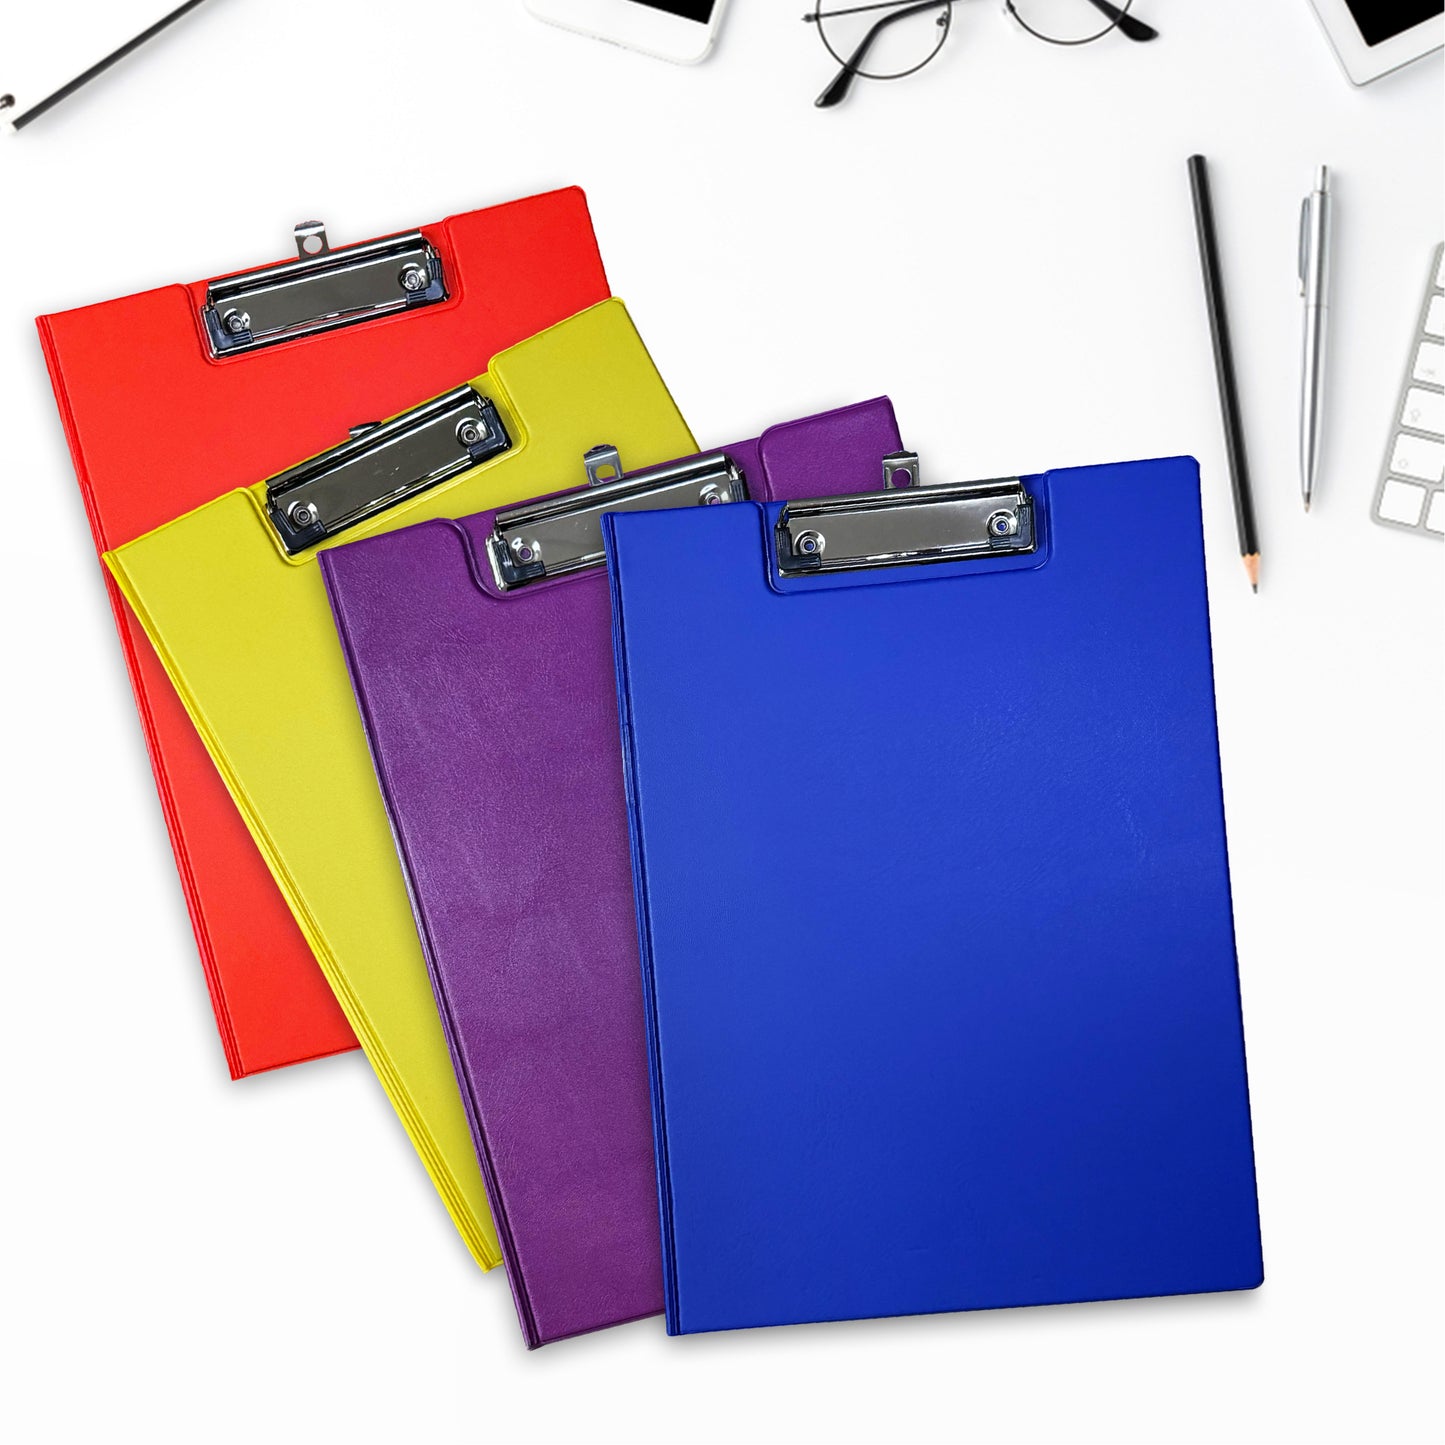 Pack of 6 A4 Neon Orange Foldover Clipboards